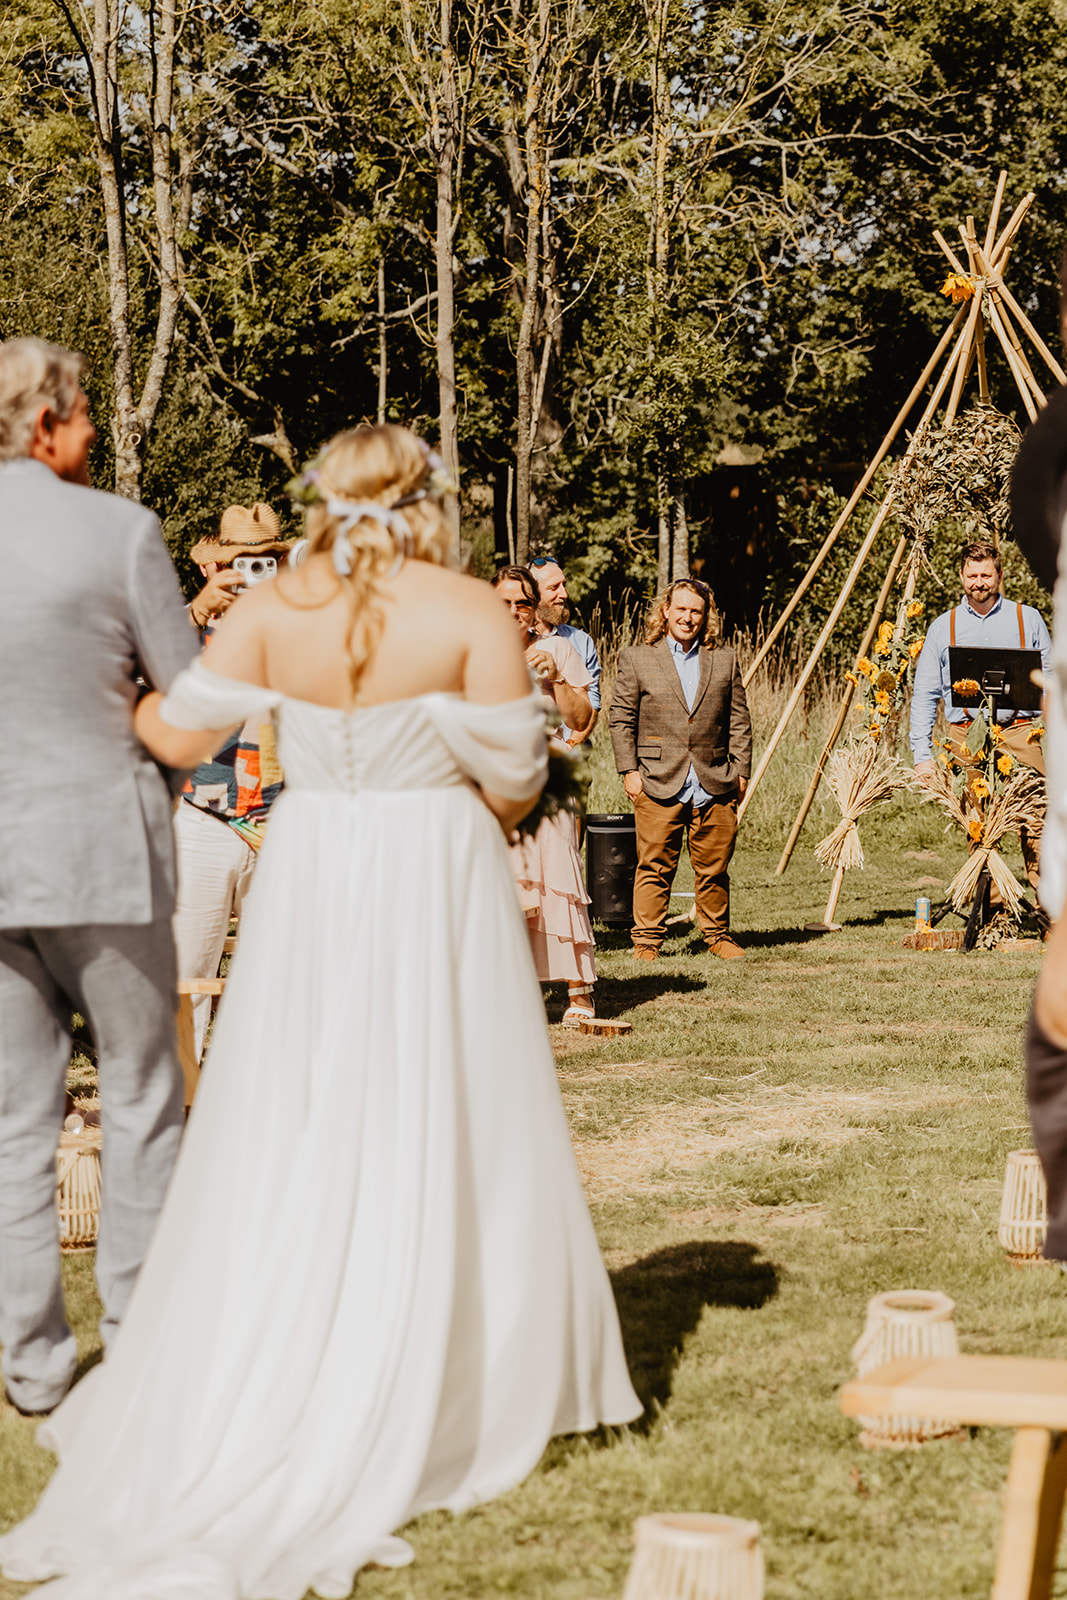 Father and Bride walking down the aisle at a wedding at Mac's Farm in Sussex. By OliveJoy Photography.